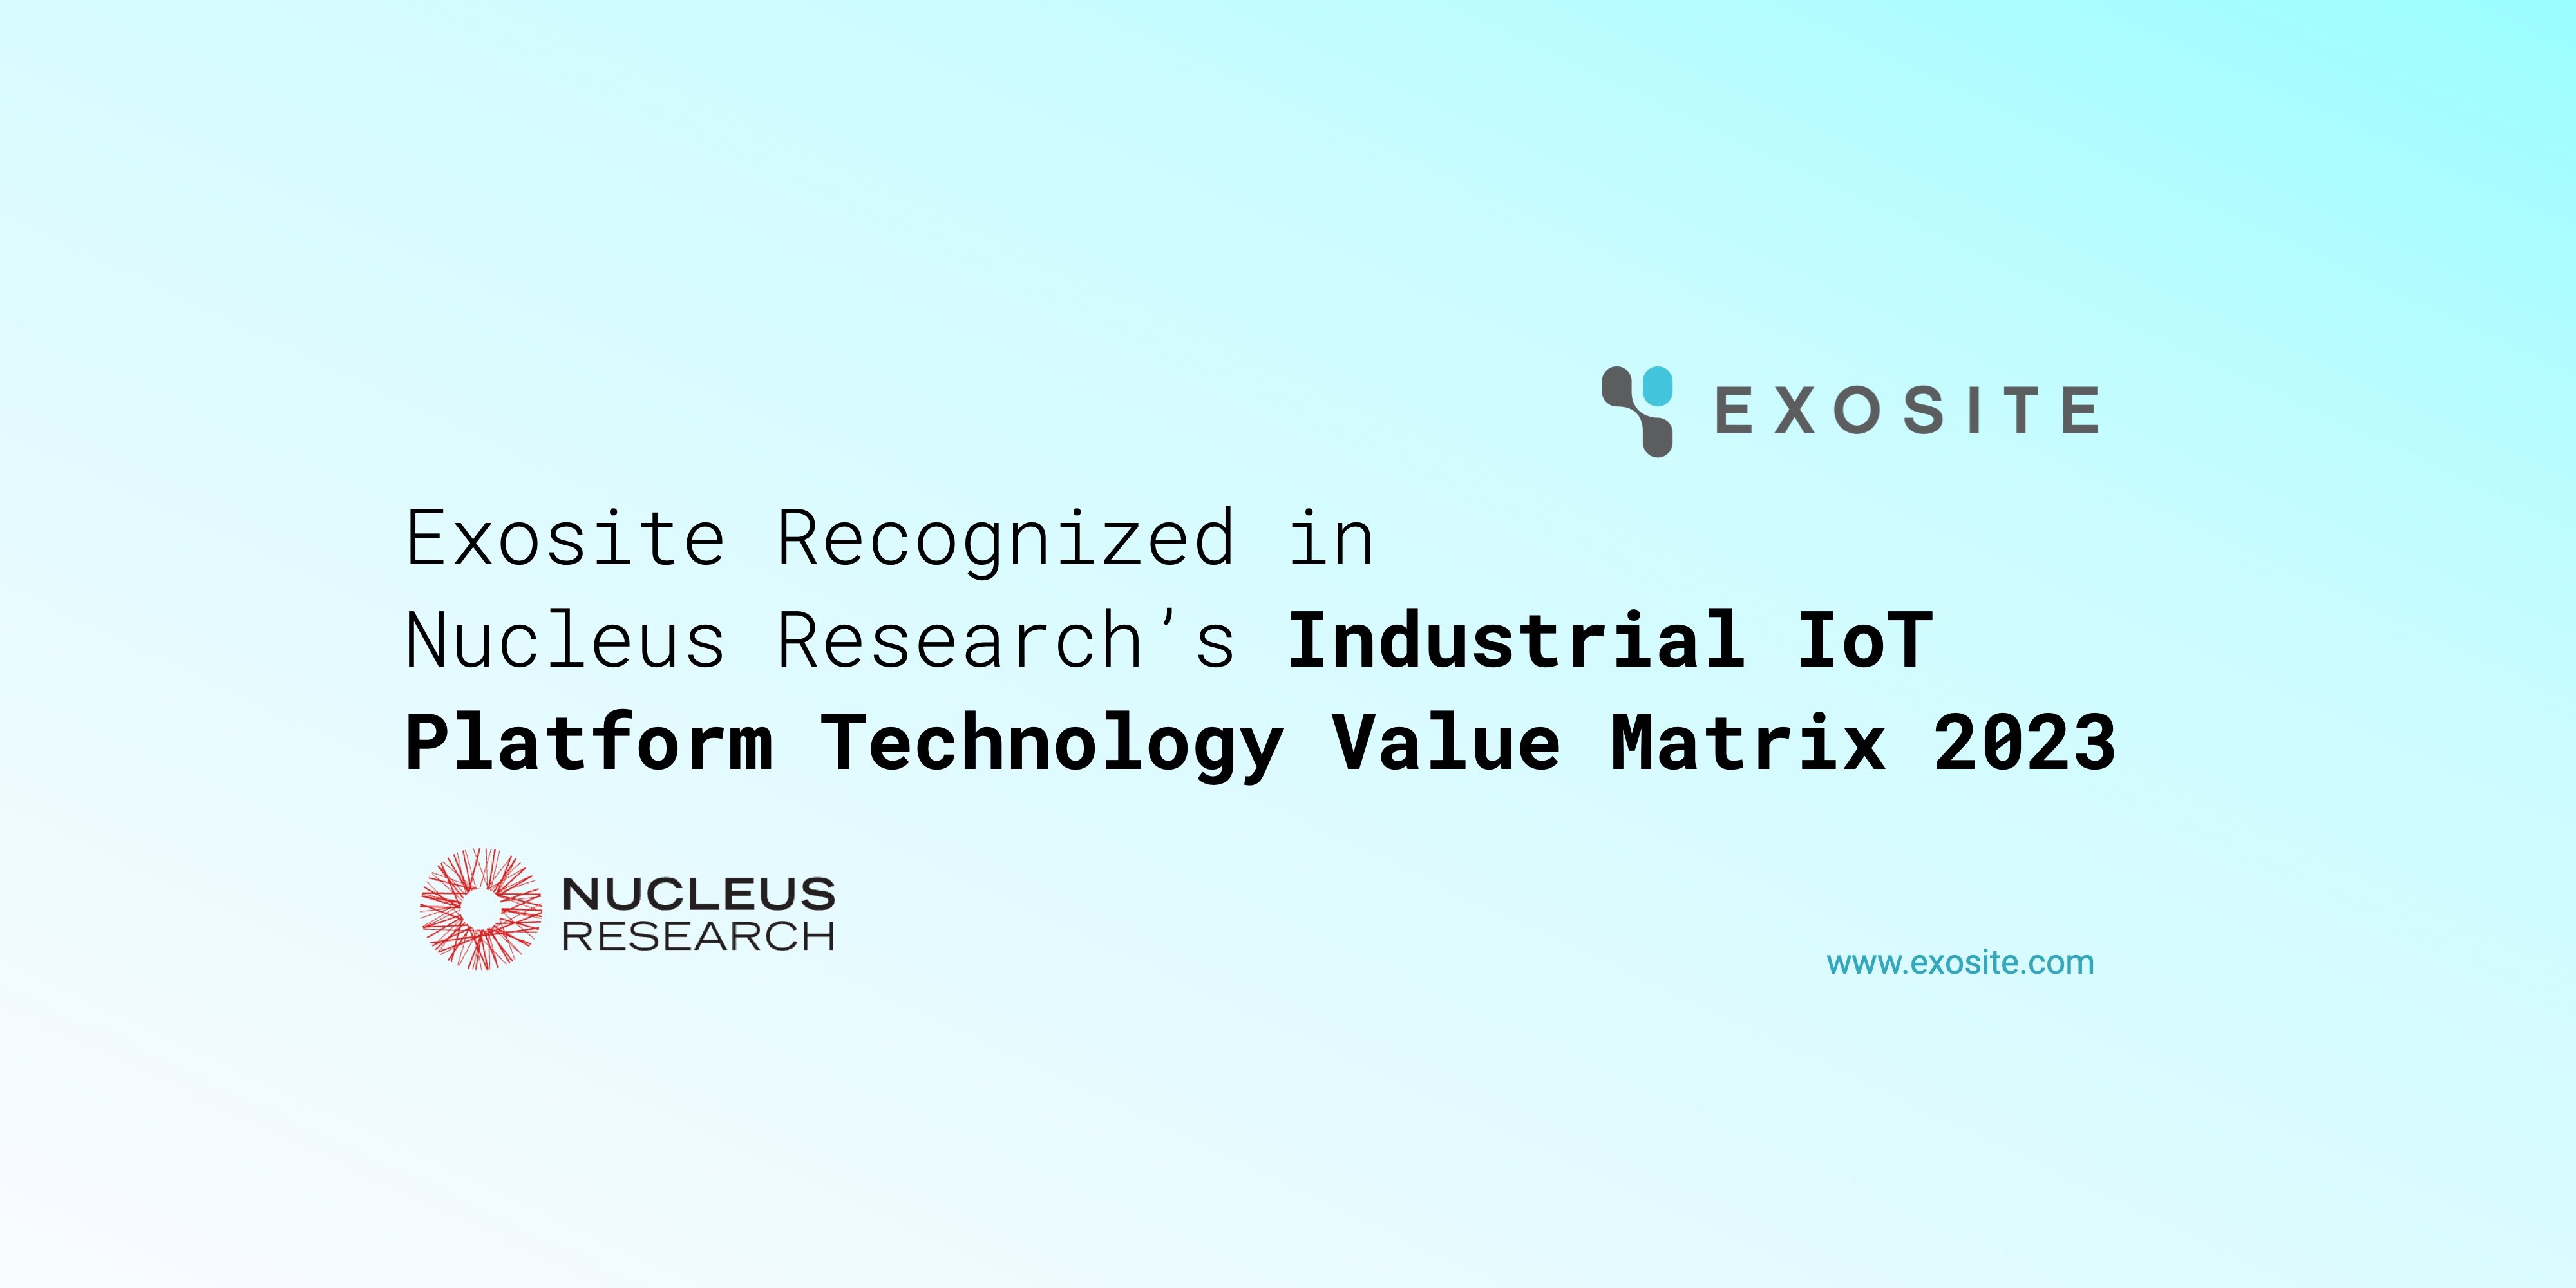 Exosite's usability ranks high in Nucleus Research's IIoT Value Matrix